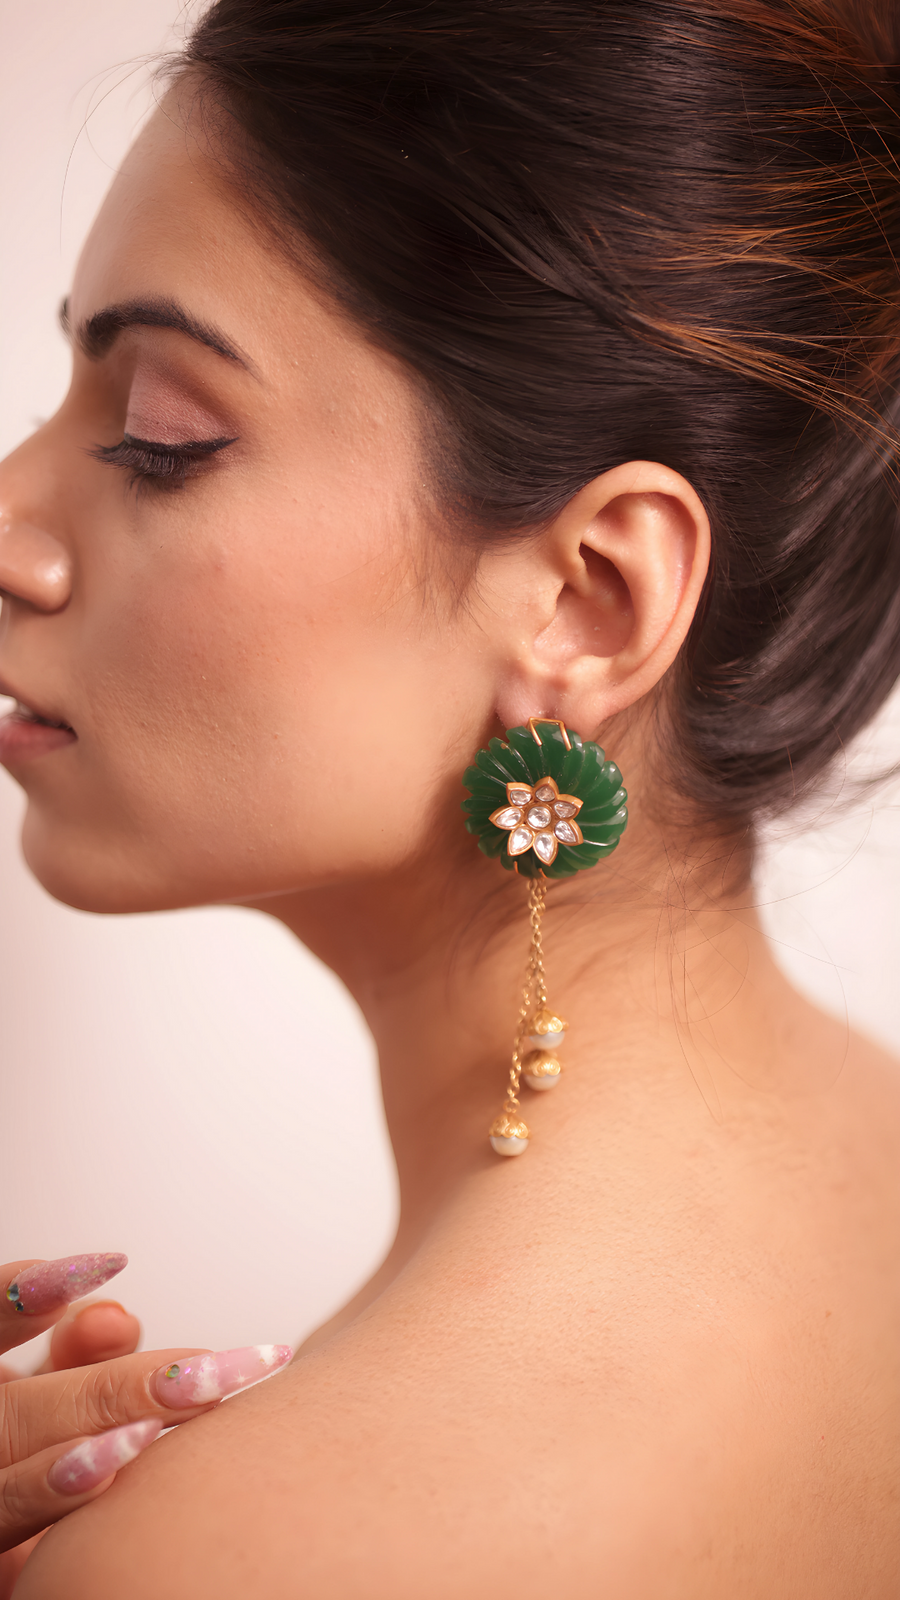 Green Kundan Earring with Pearl Chains